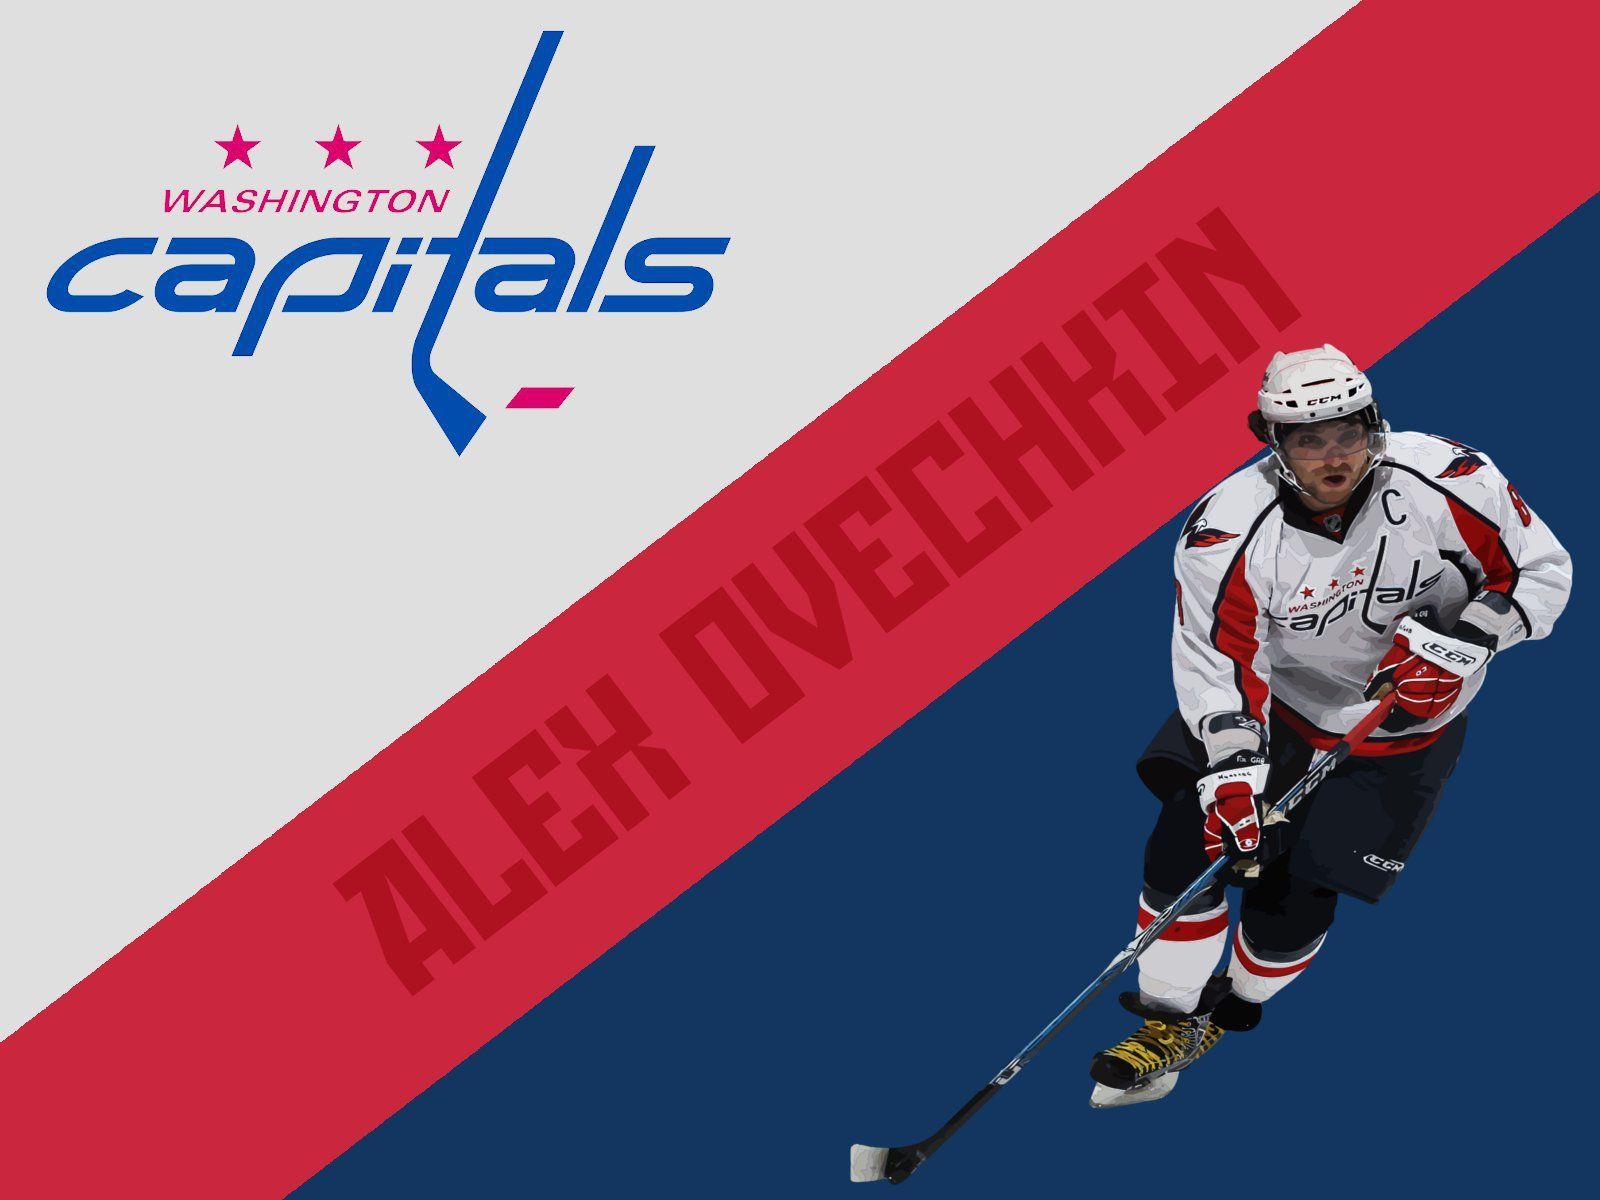 Player of Washington Alexander Ovechkin wallpapers and images ...